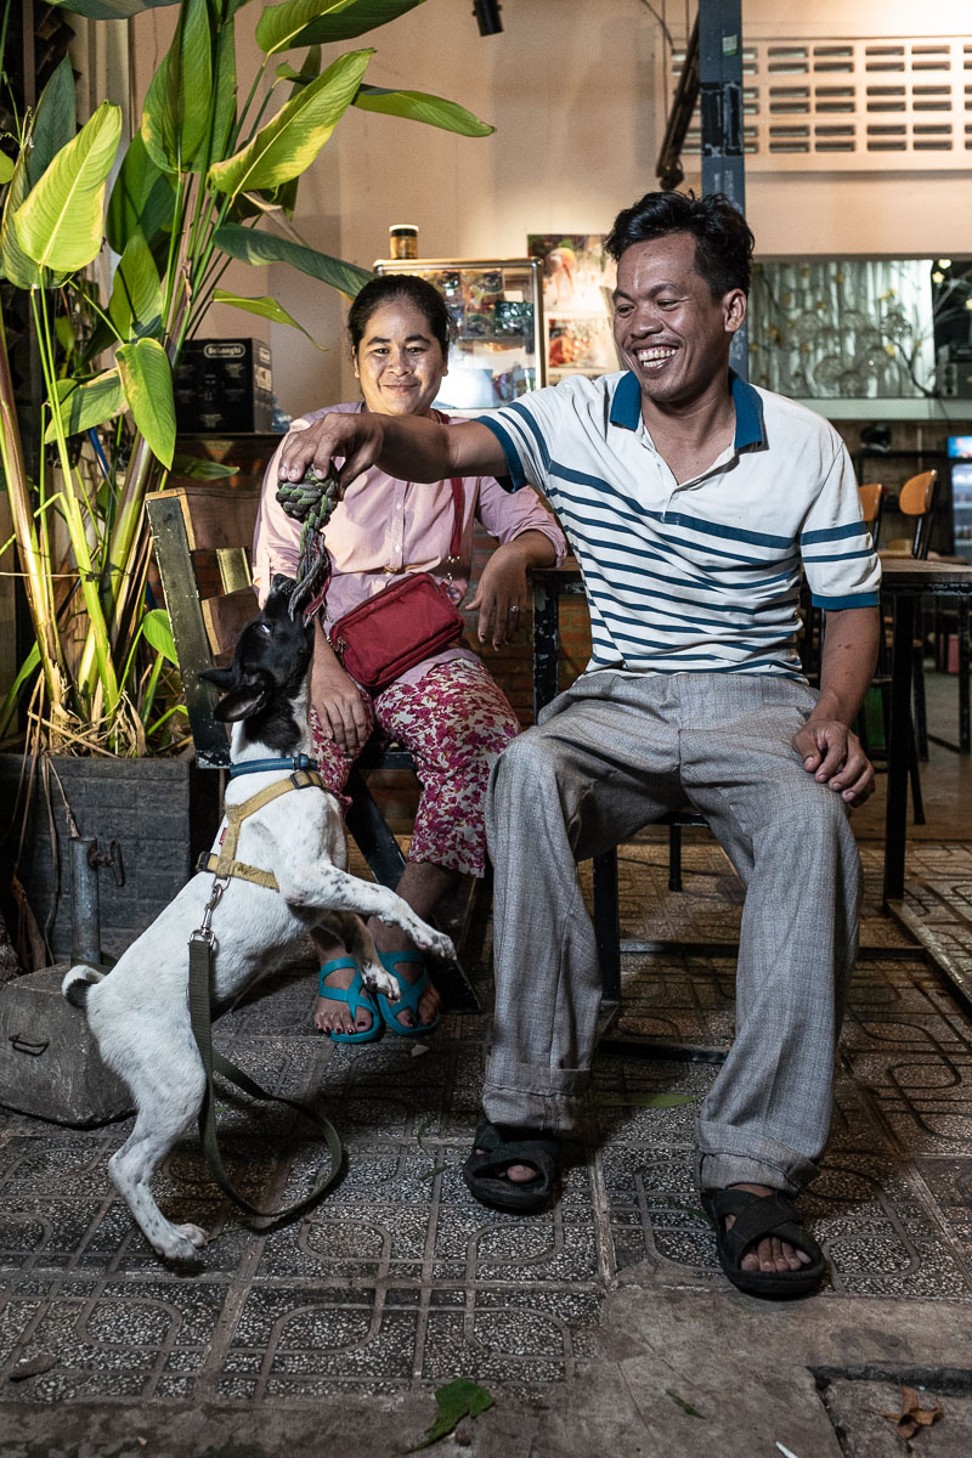 Chom Mong and his wife, Syna, who previously ran a dog meat restaurant but are now running a vegan restaurant, Sabay Vegilicious, in Phnom Penh, Cambodia. Photo: Enric Catala